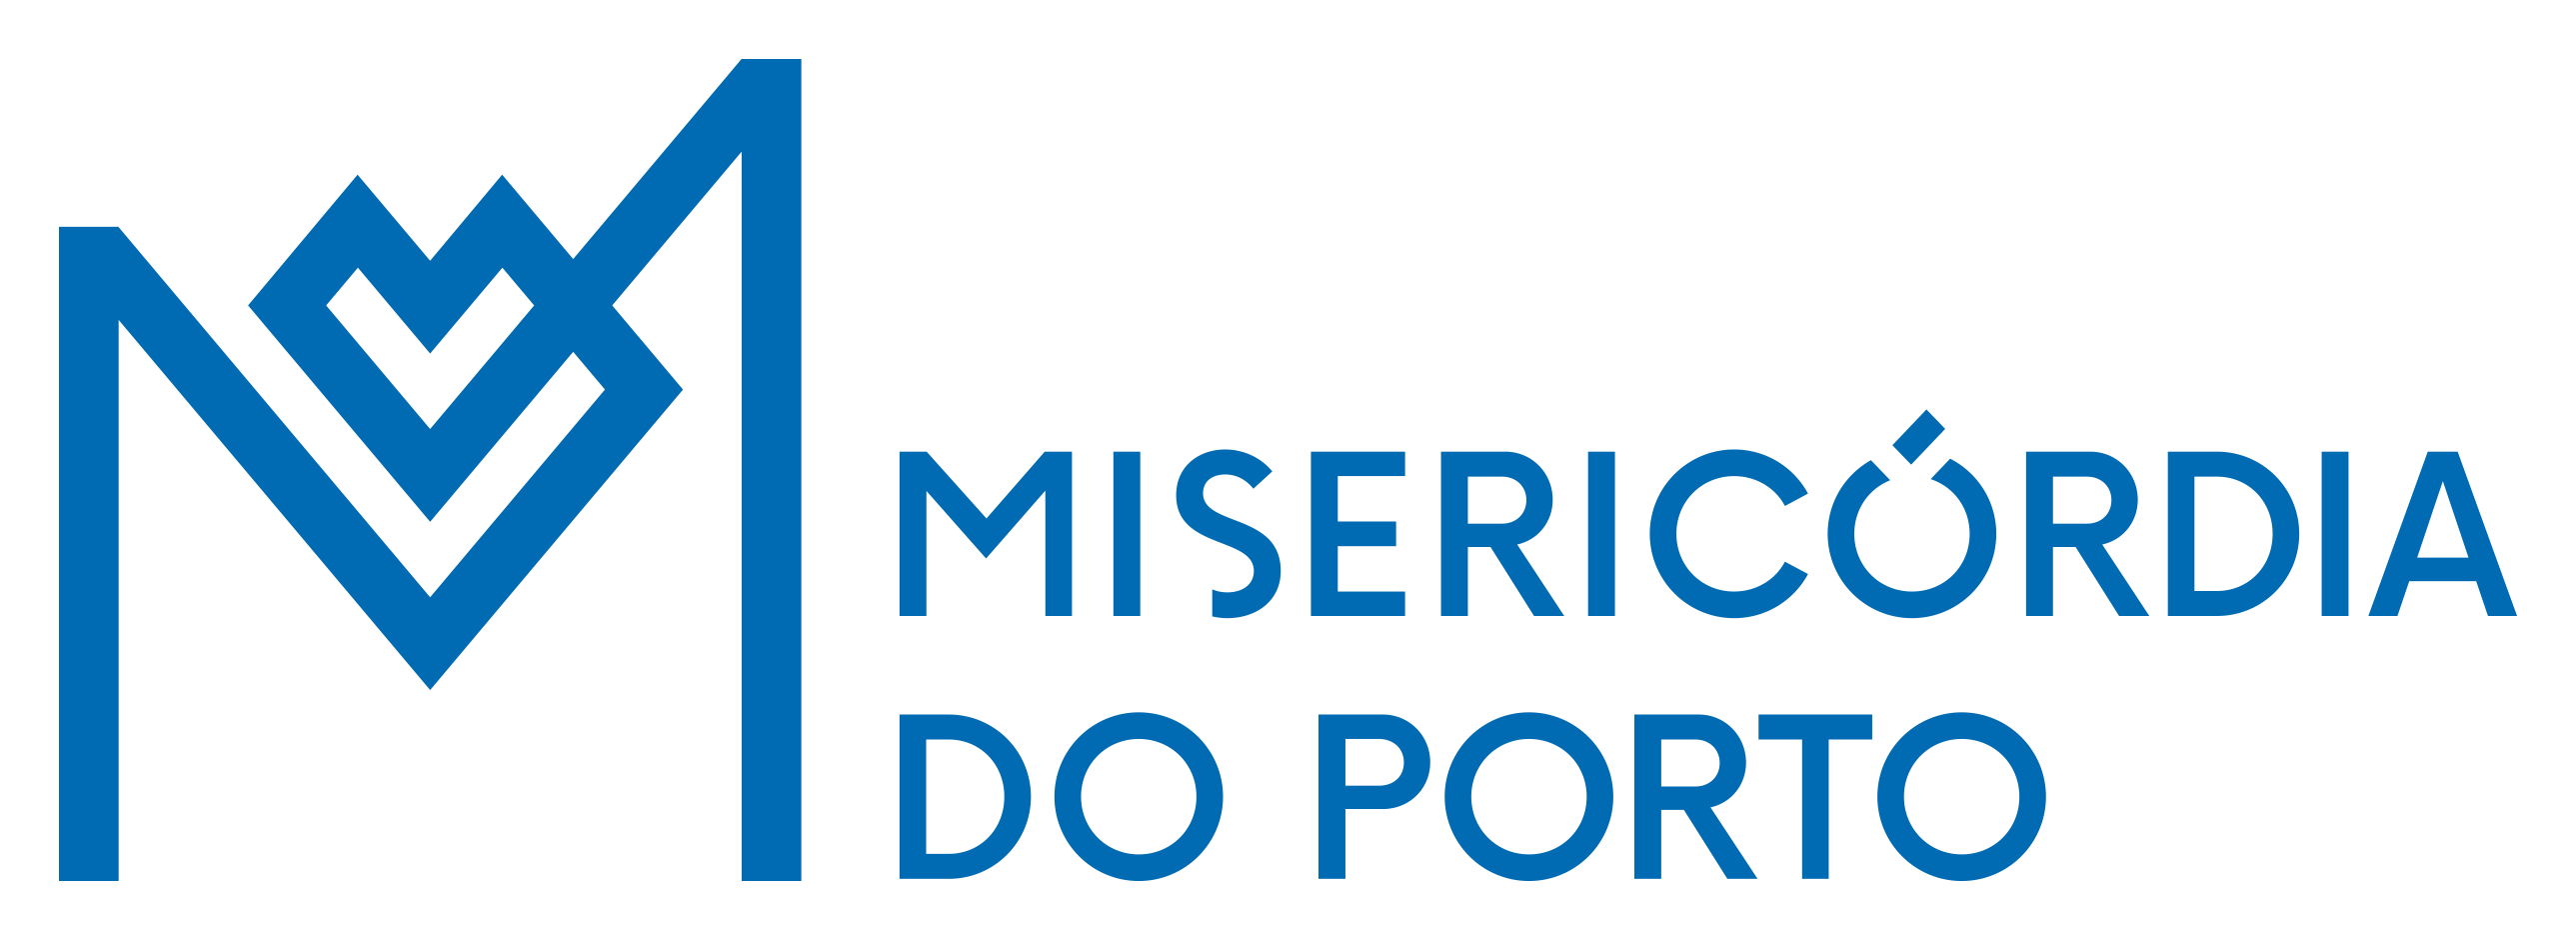 https://www.scmp.pt/assets/misc/img/Instituicao/Log%C3%B3tipo/Logo_MP_cores.png